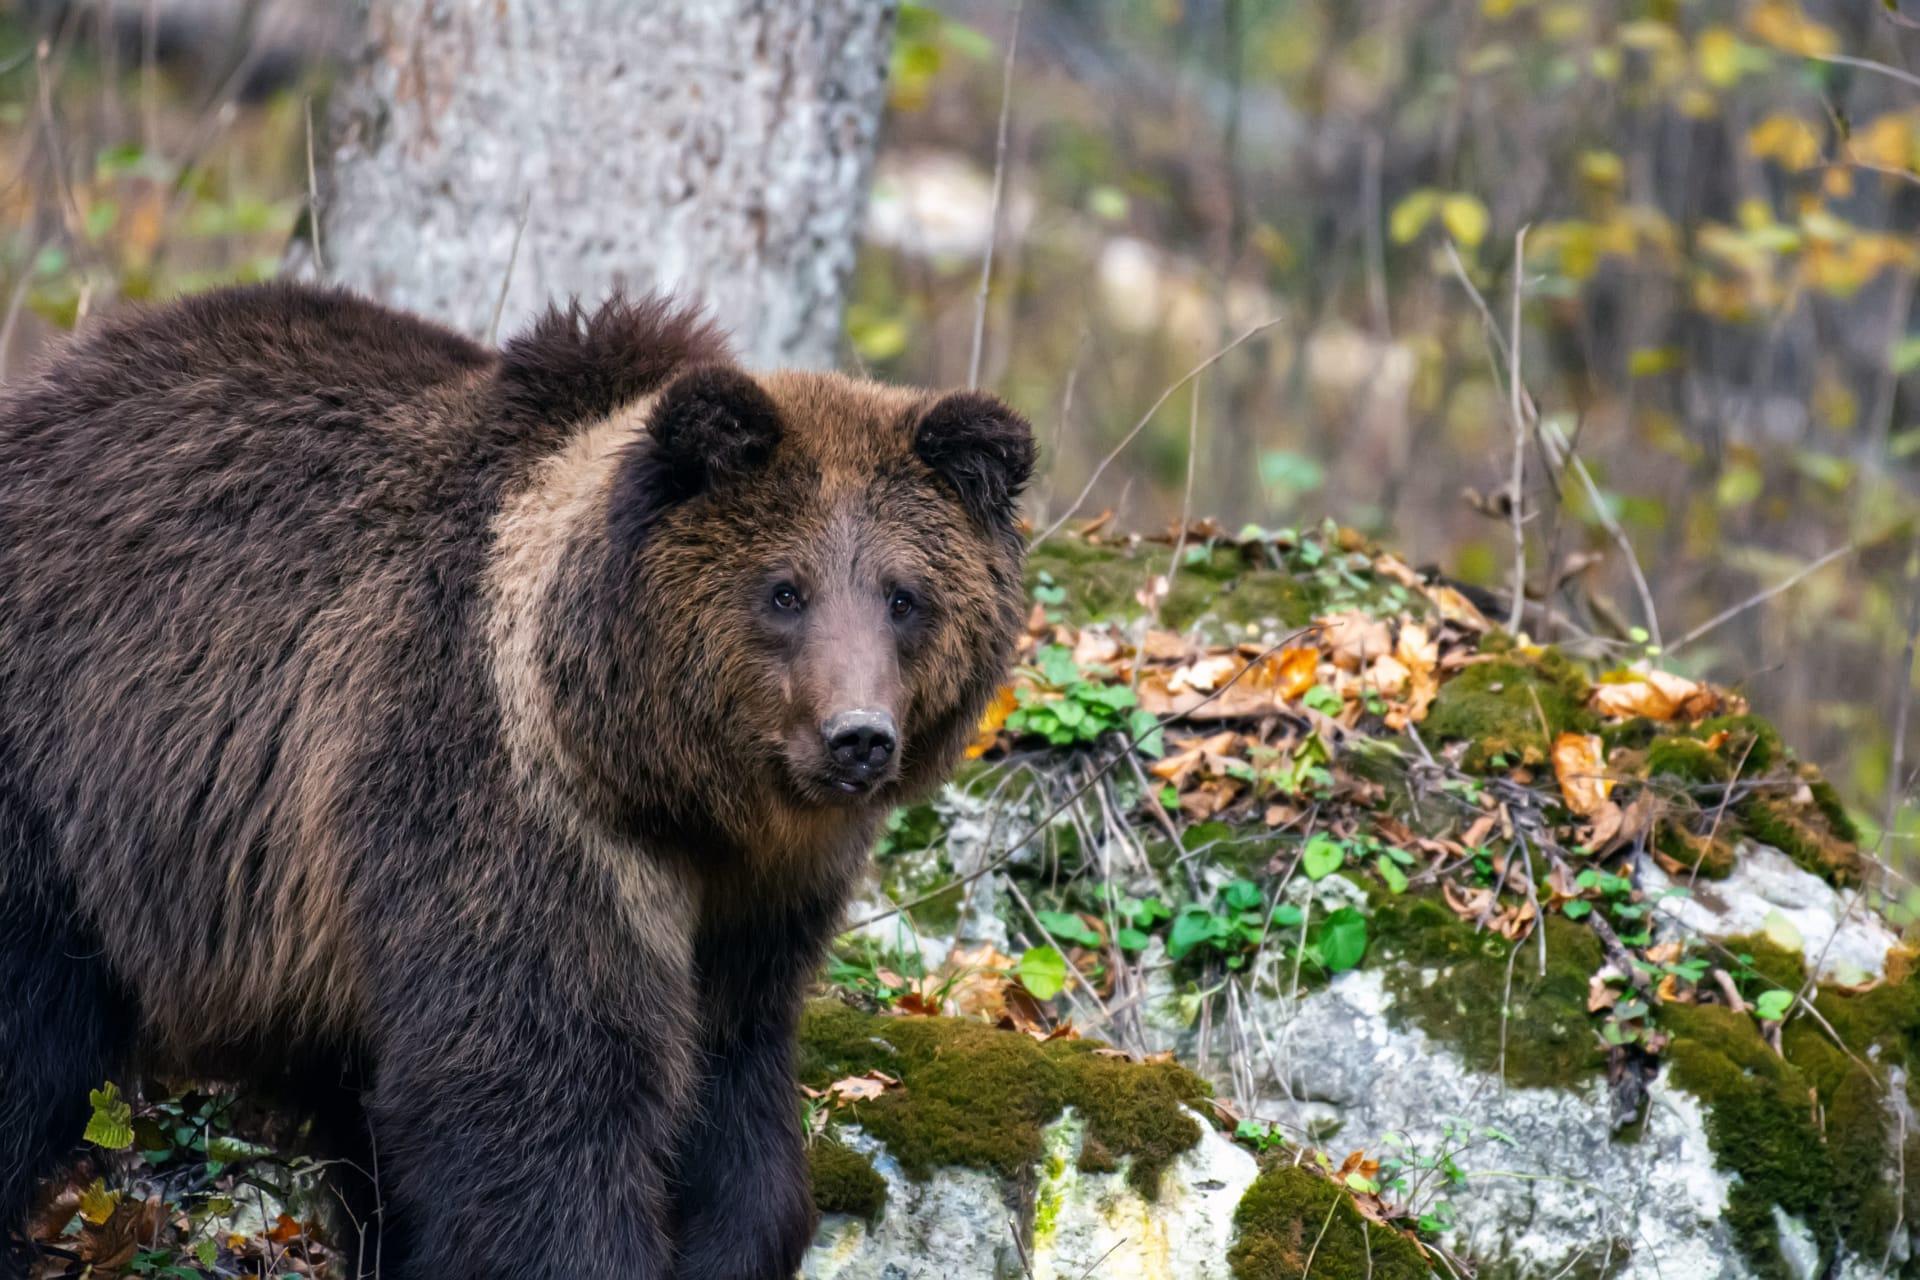 Brown bear pictures